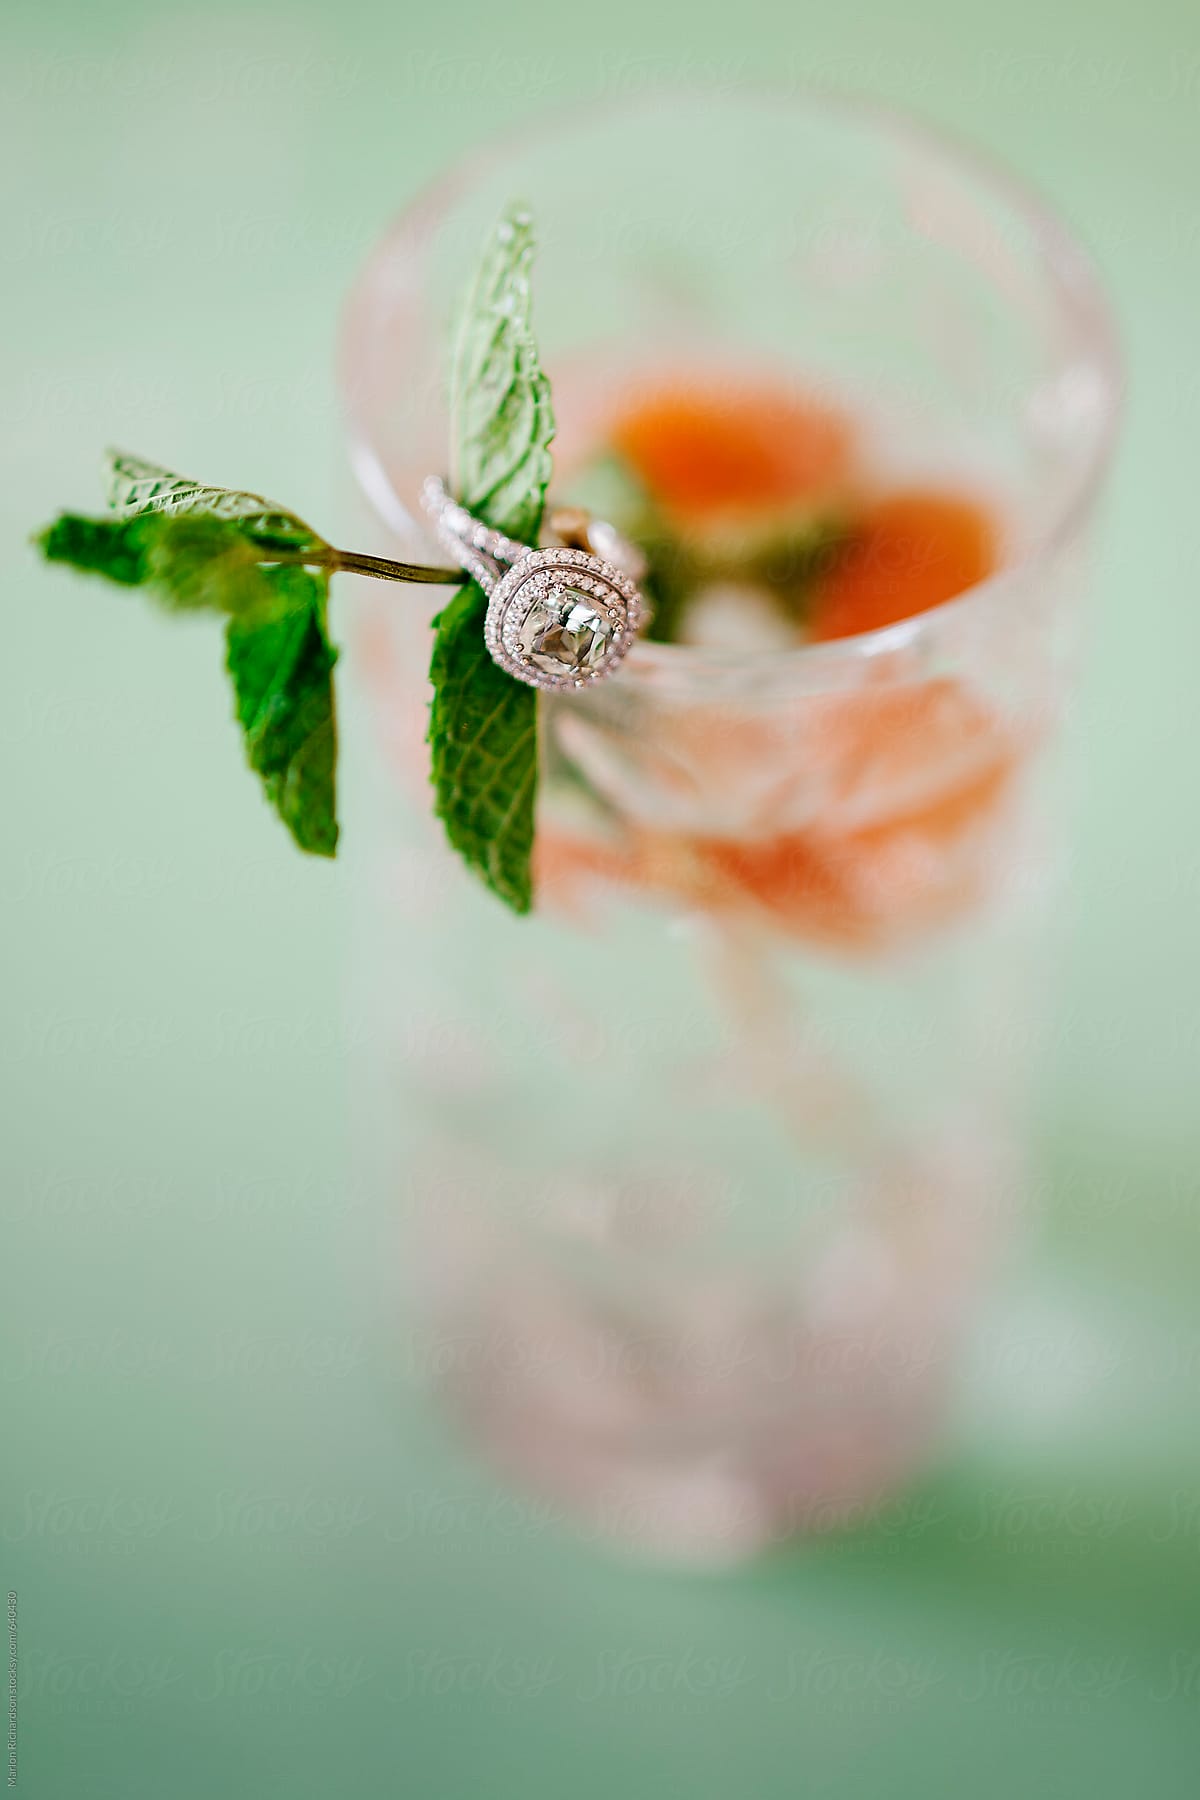 Peach & Mint Spritzer with an engagement ring